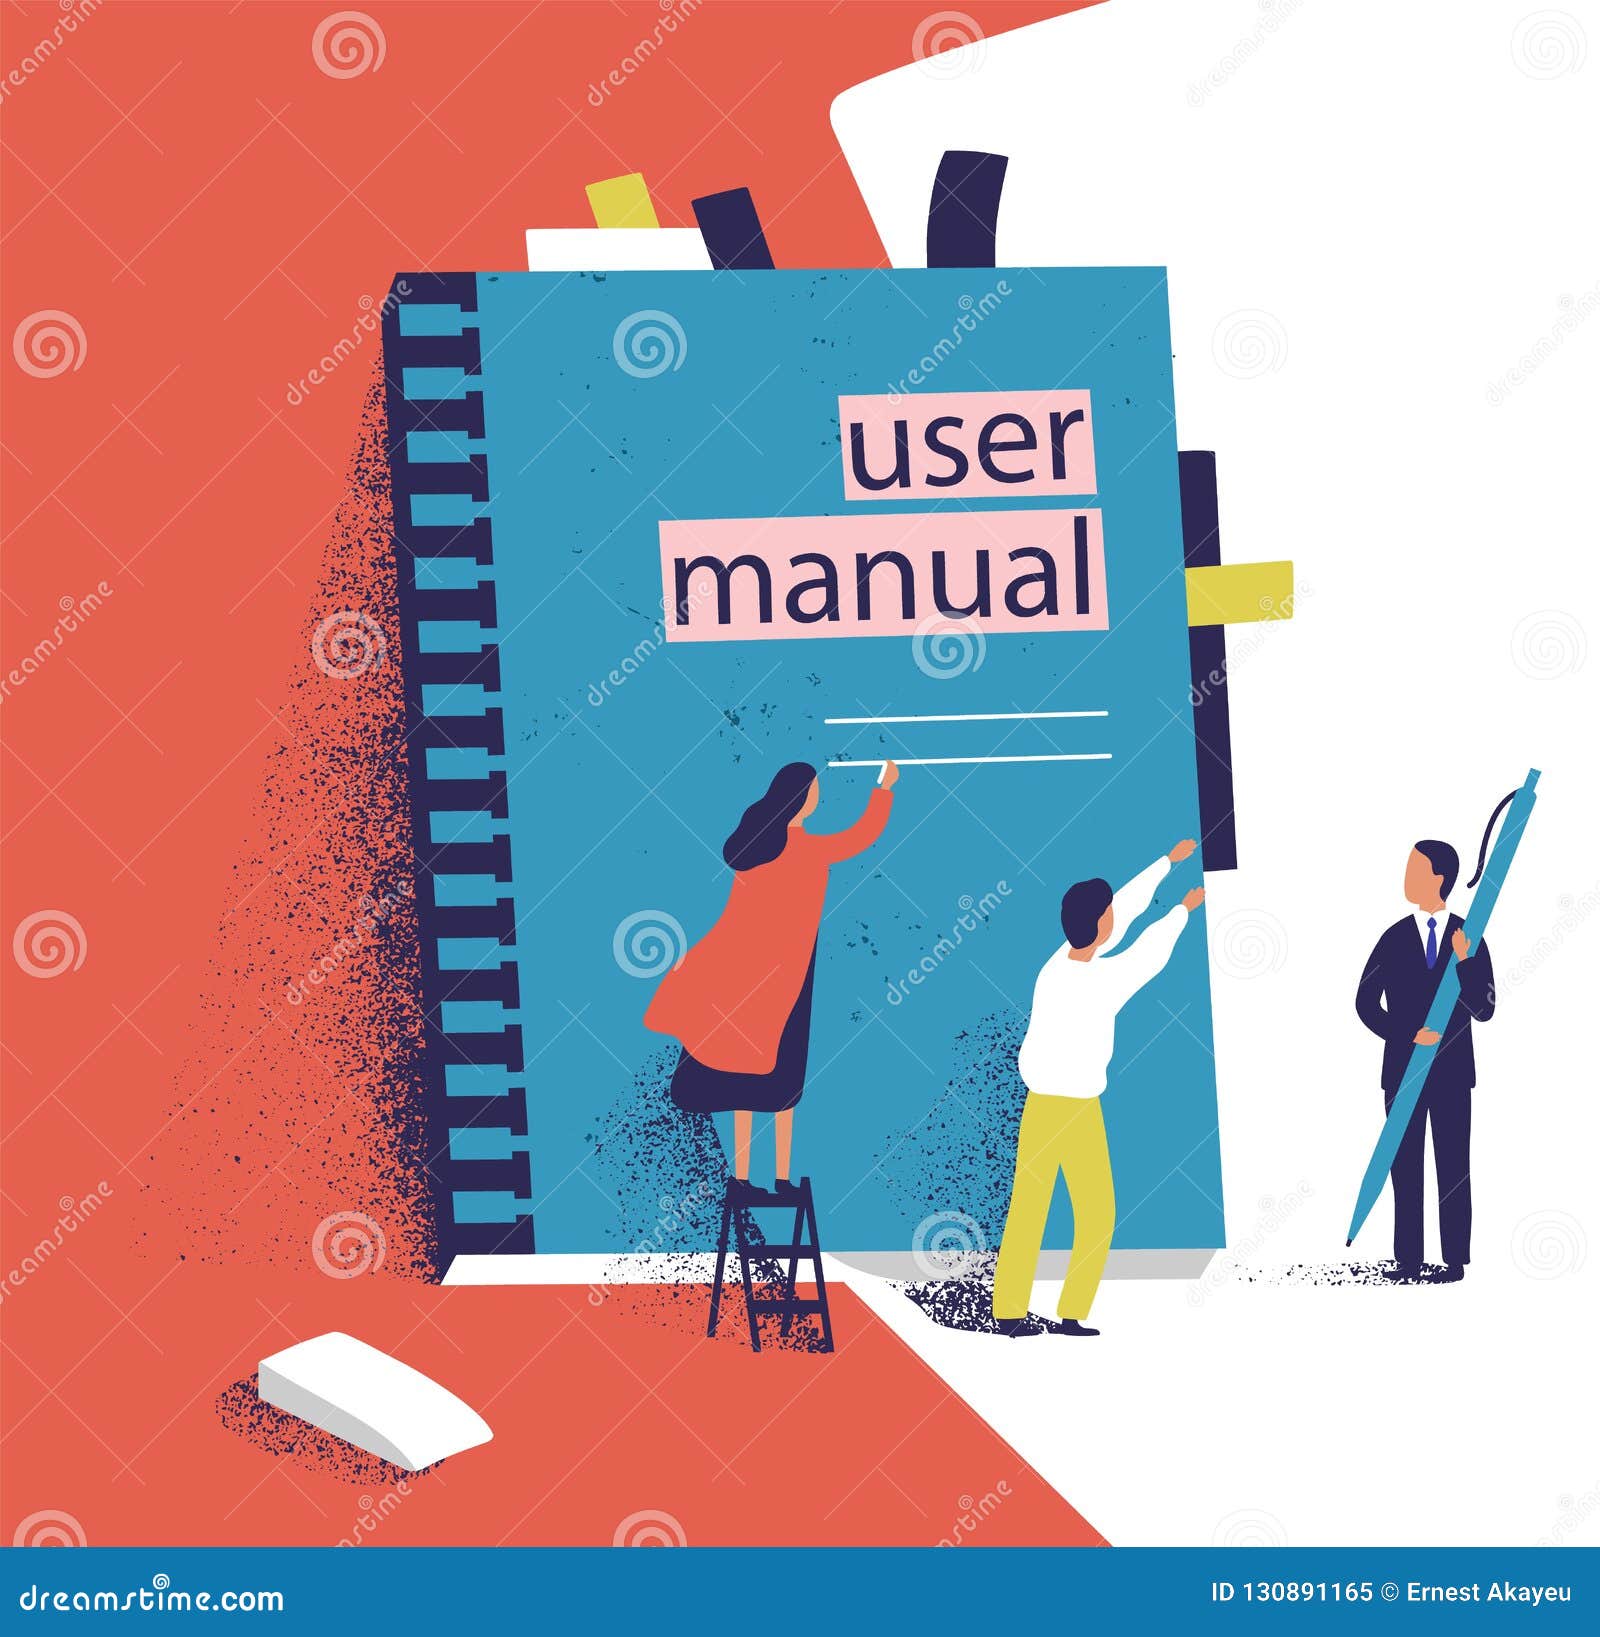 tiny people or managers trying to open giant user manual. small men and women and large computer software guide or